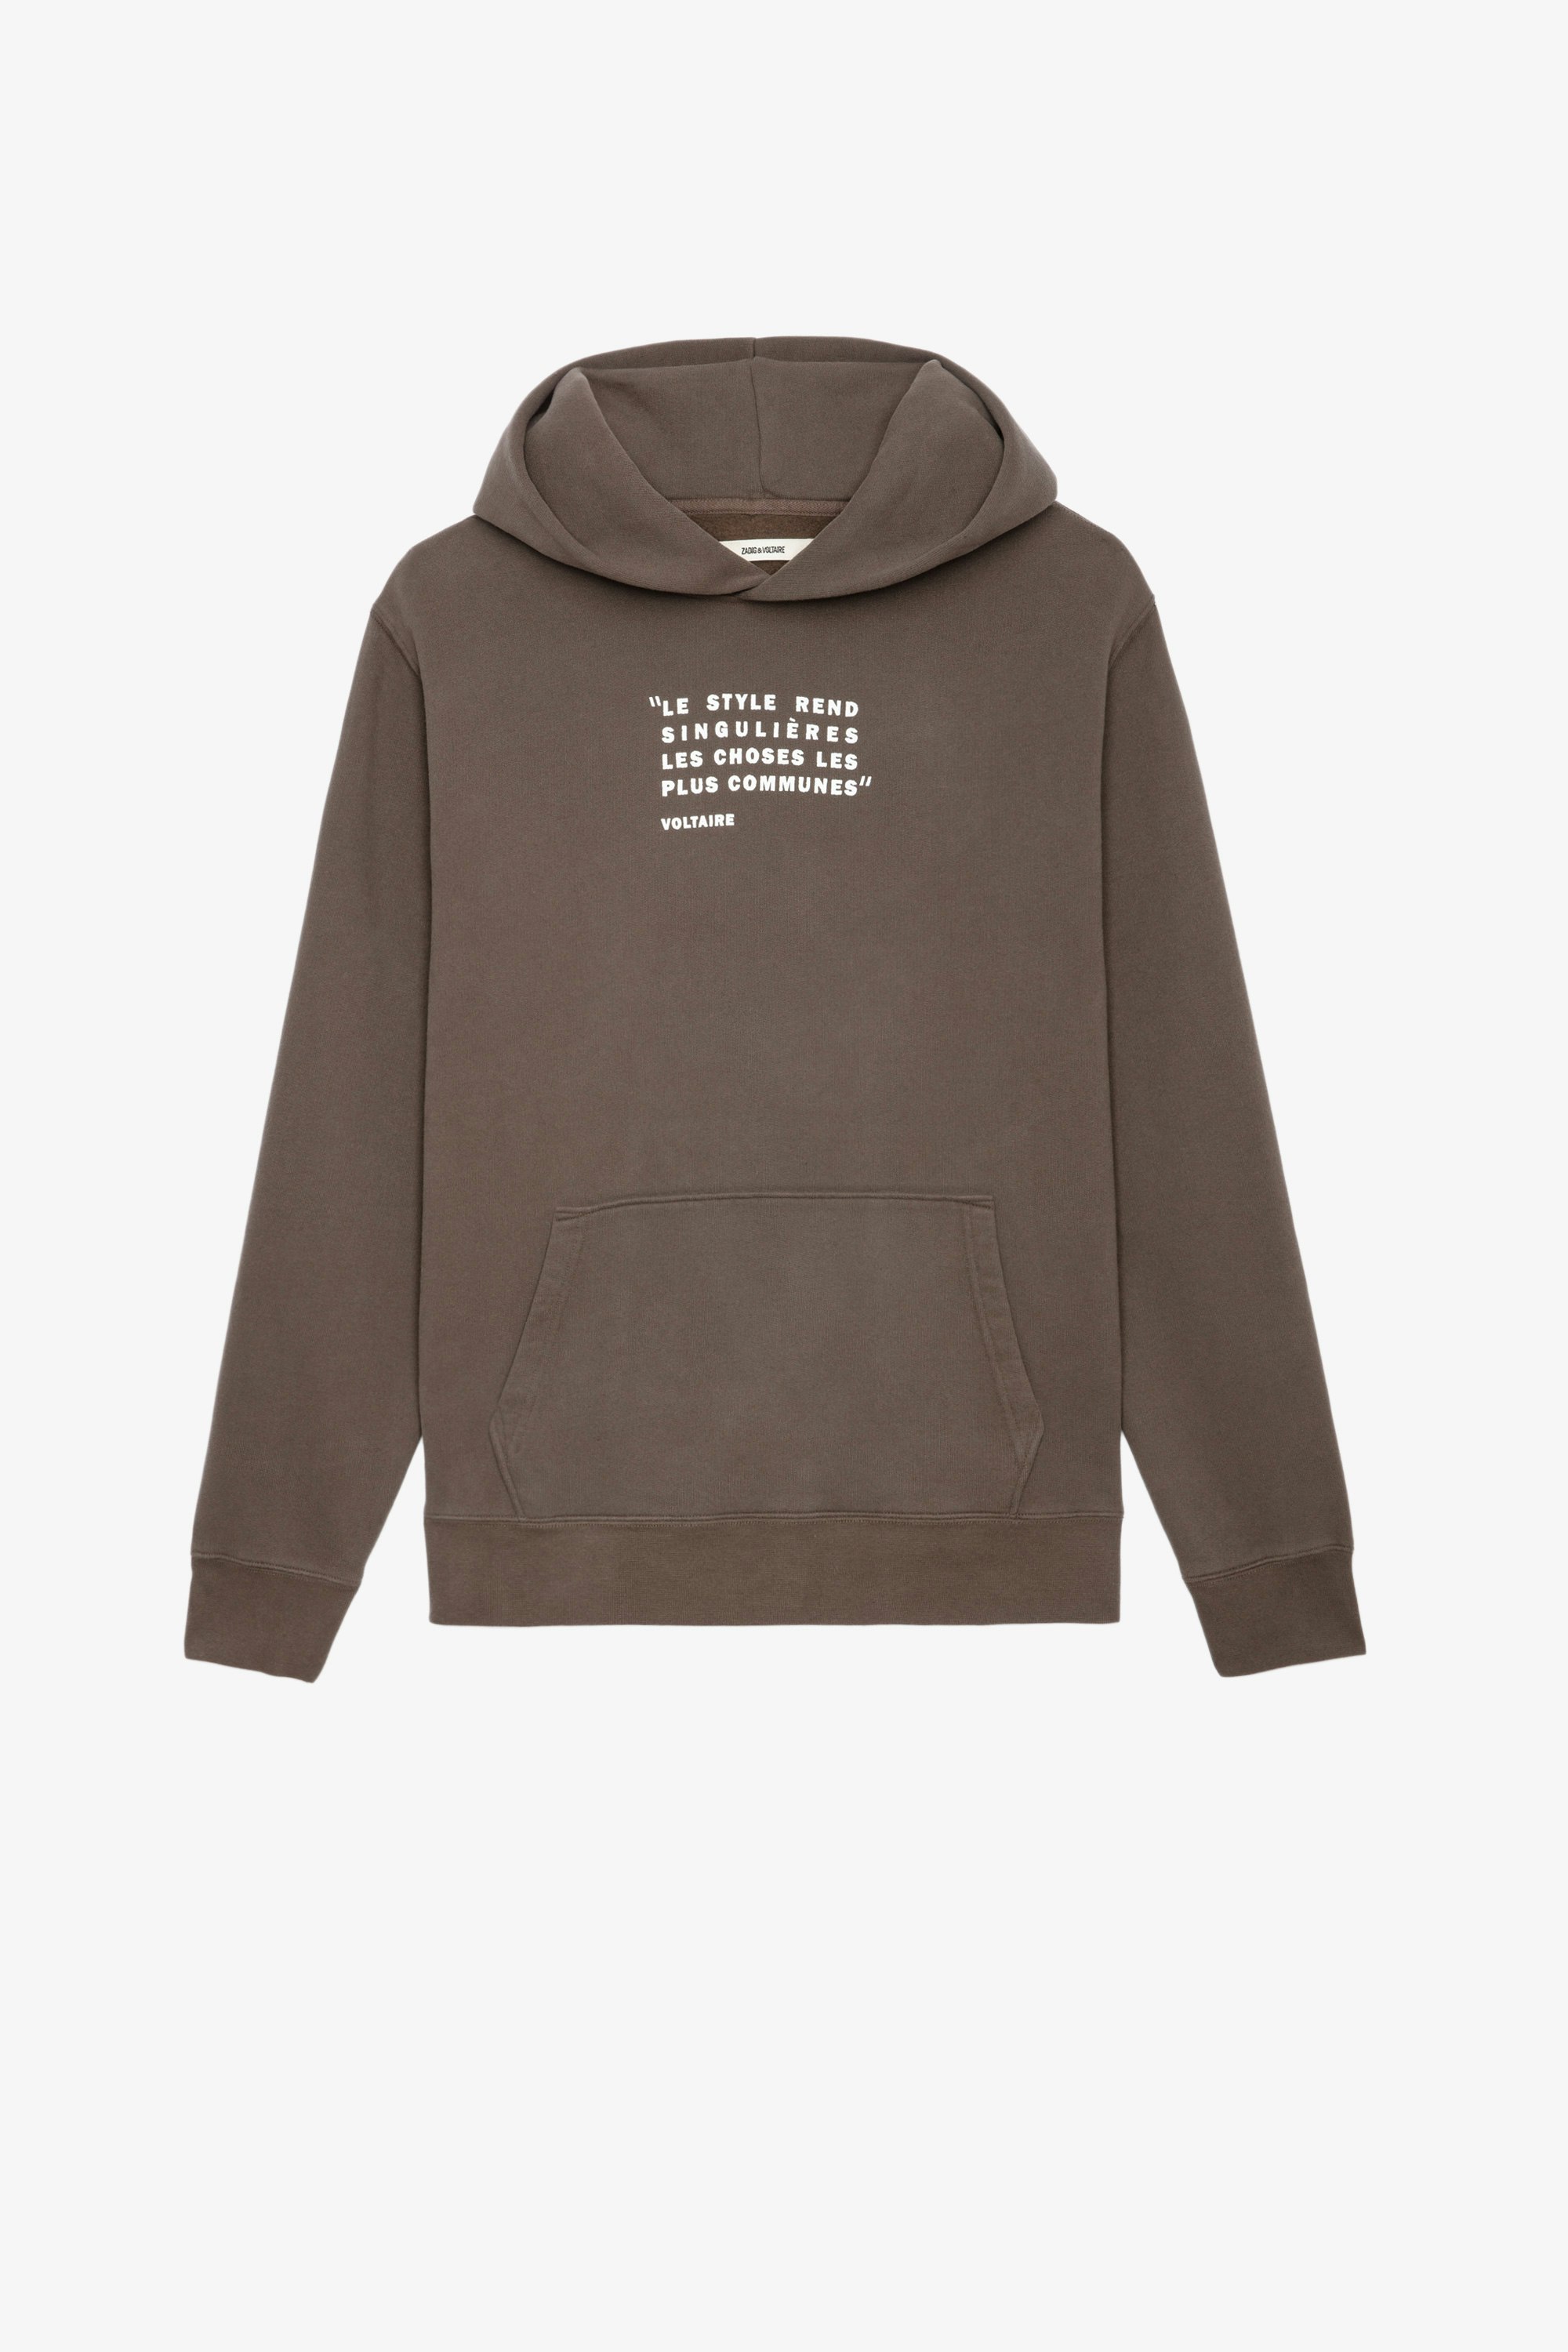 Sanchi フォトプリント スウェット Men’s bronze cotton hoodie with printed text and photoprint on the back